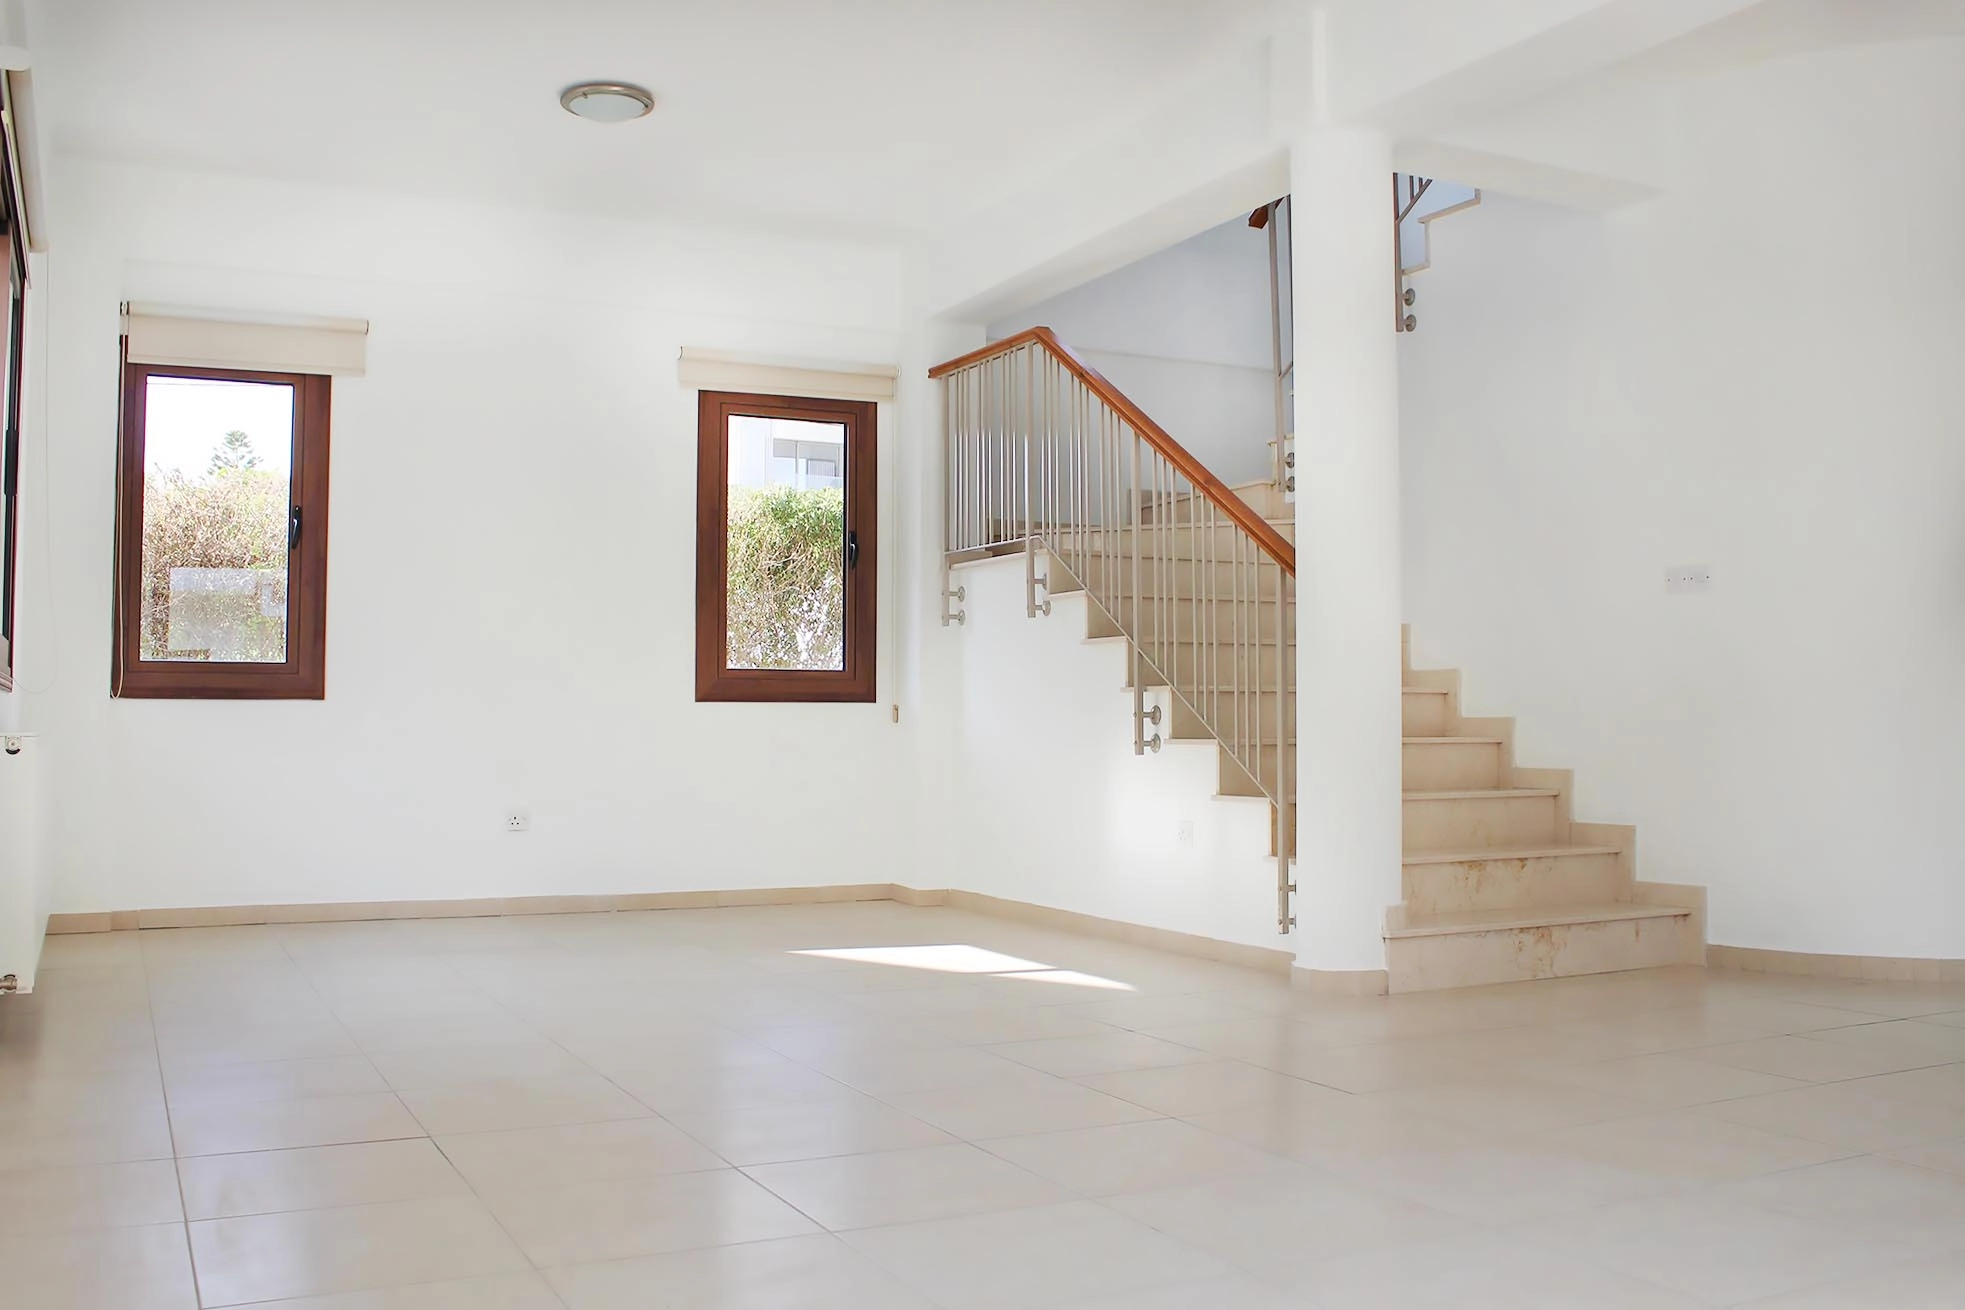 6+ Bedroom House for Sale in Strovolos – Dasoupolis, Nicosia District